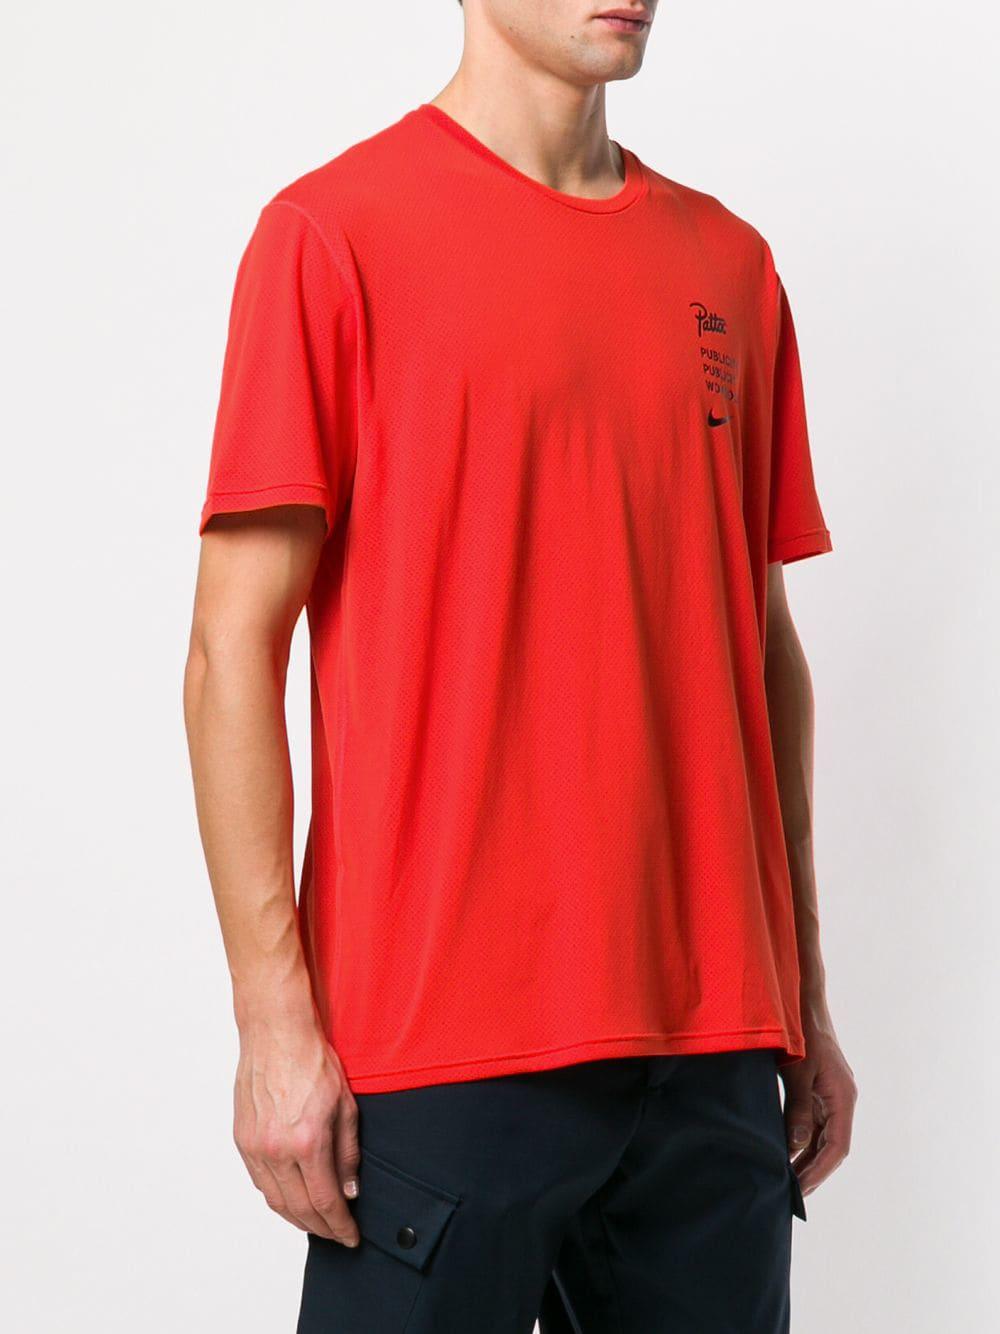 Lab X Patta T-shirt in Red for |